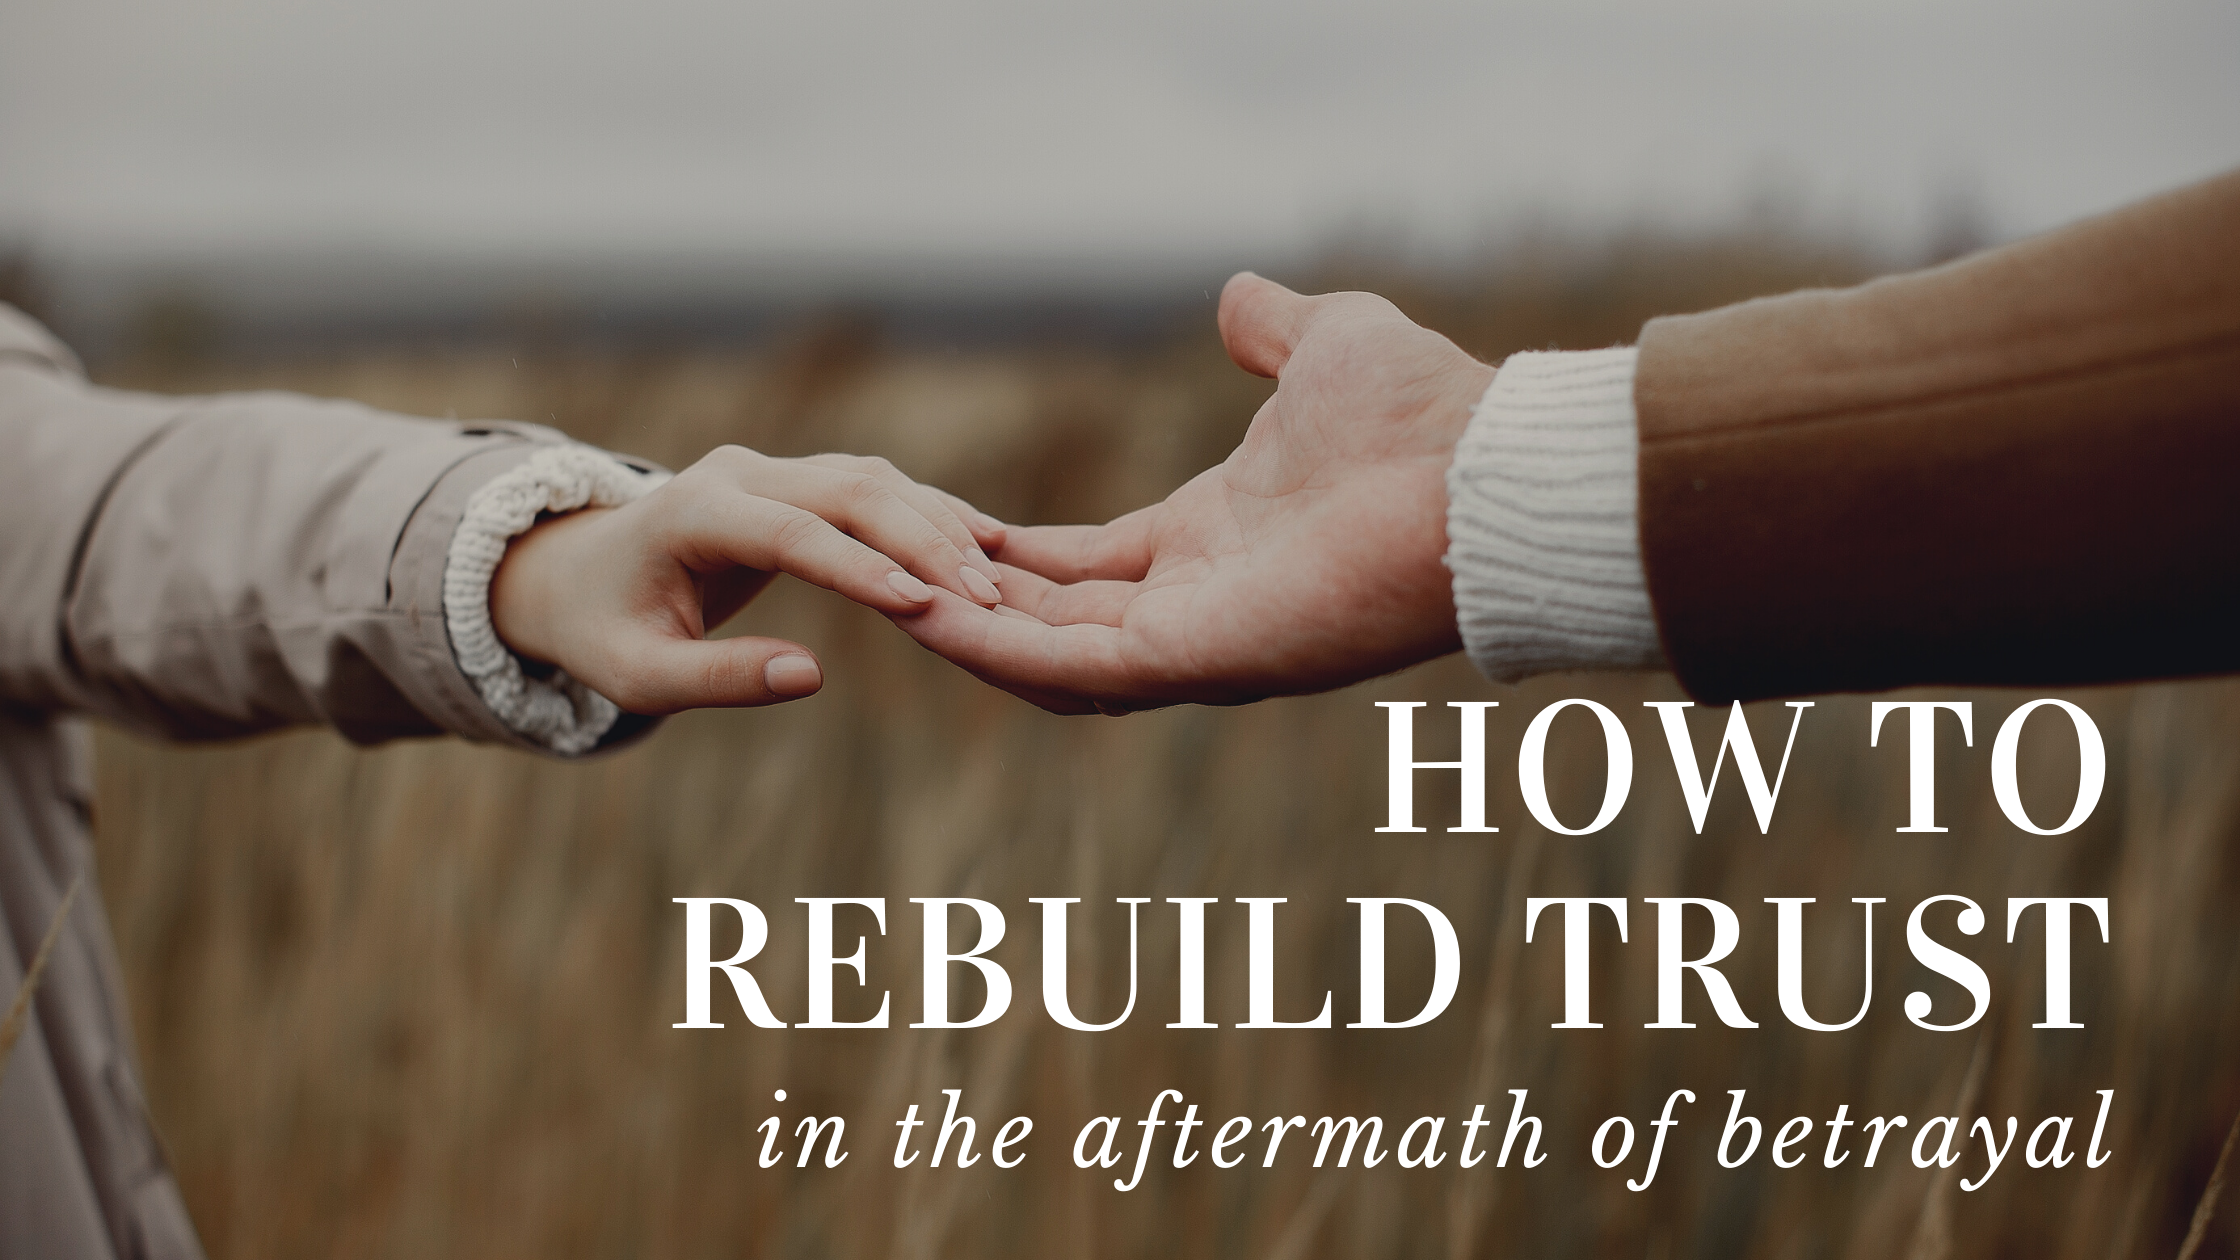 How to Rebuild Trust After a Betrayal